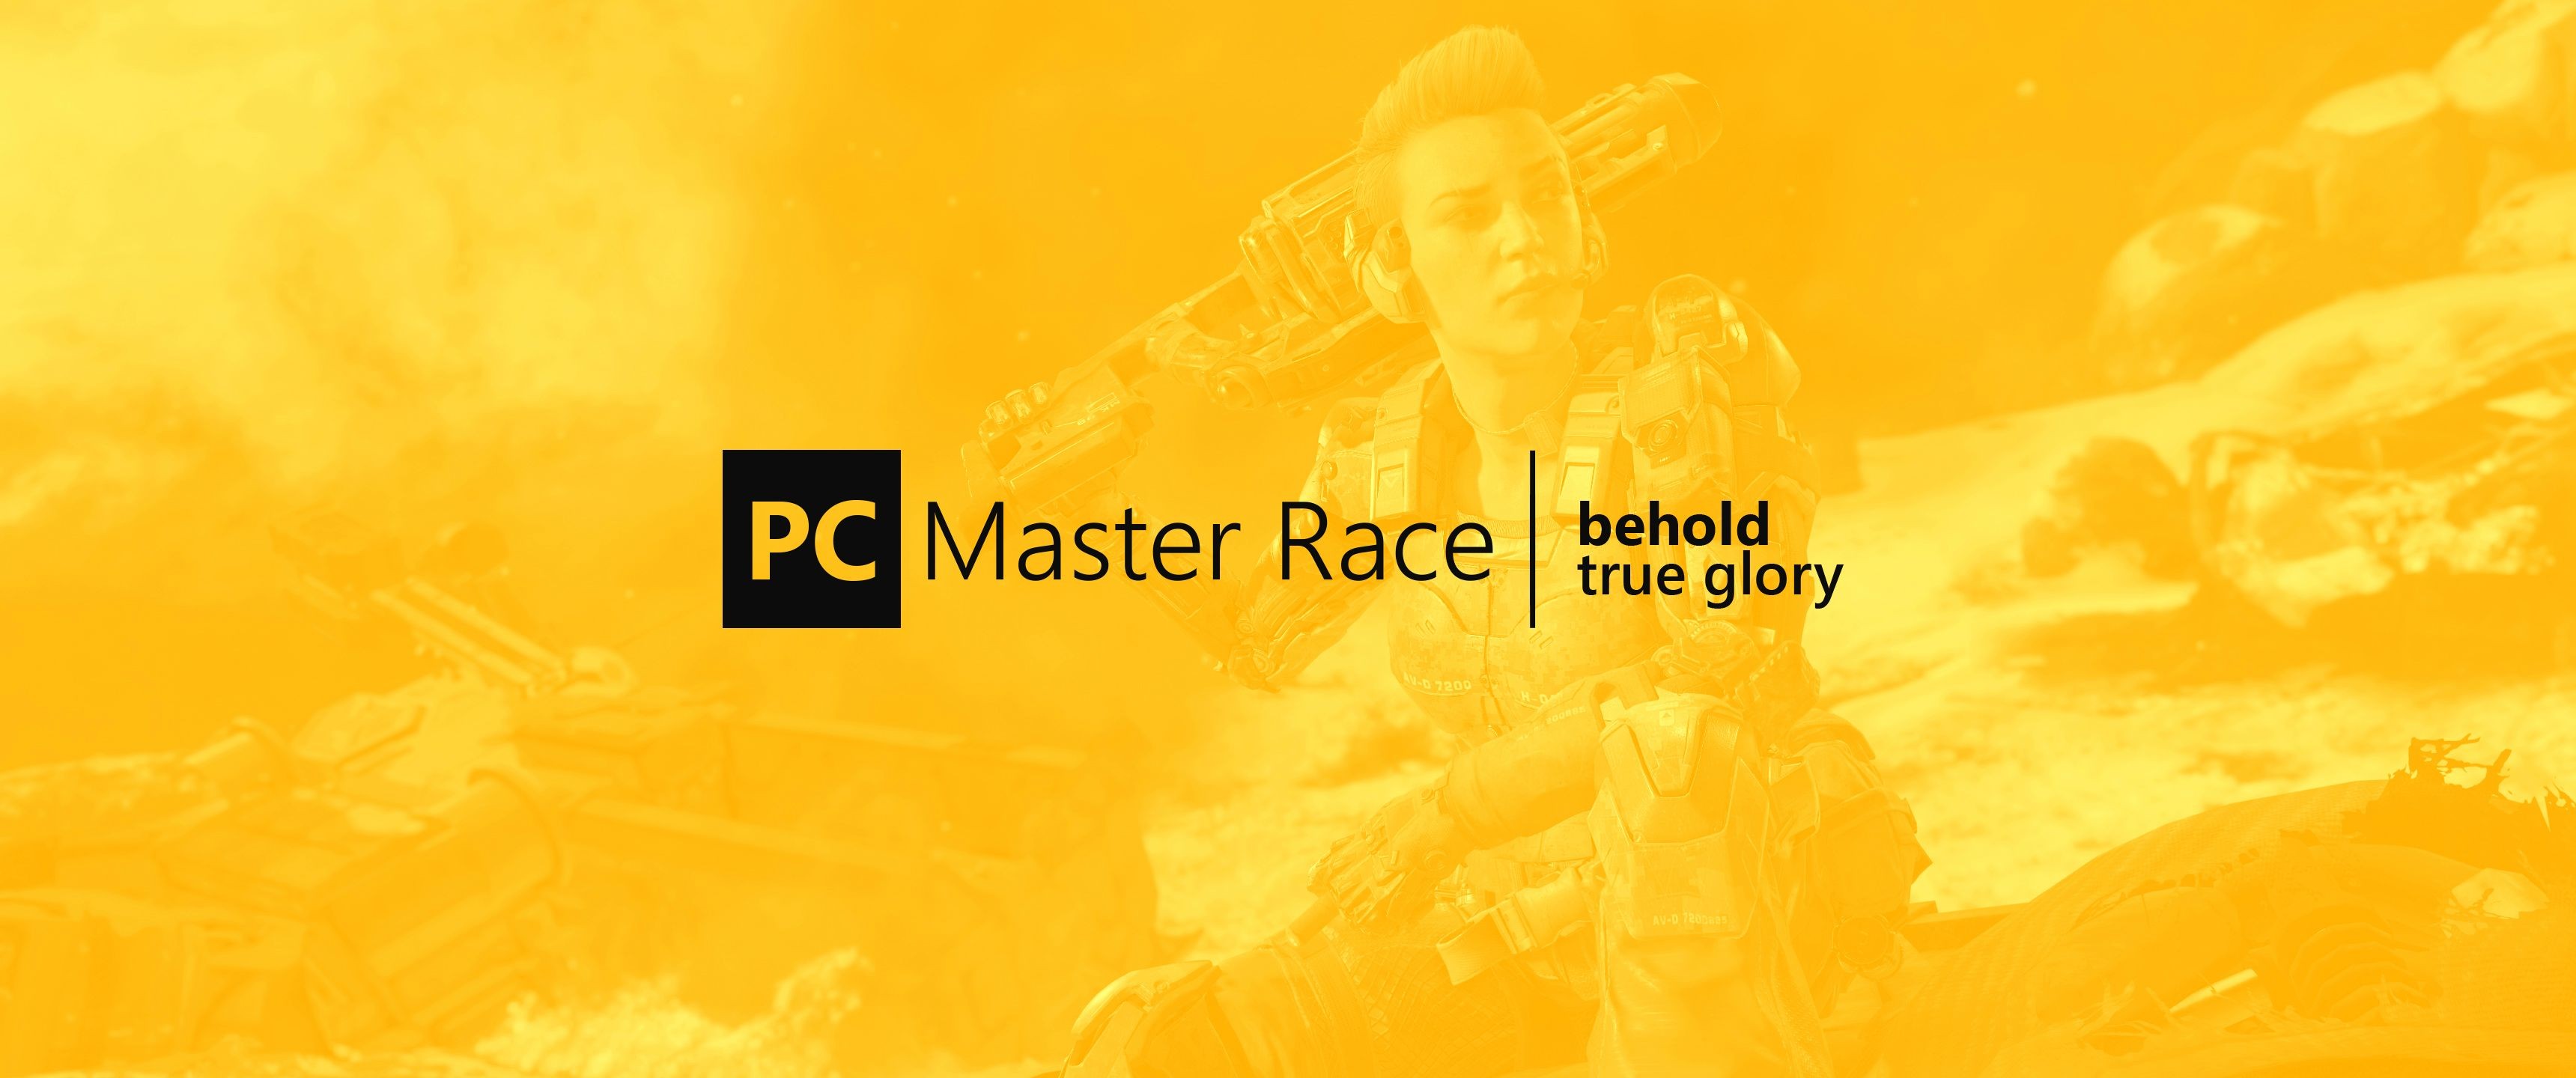 General 3440x1440 PC gaming PC Master  Race yellow background text digital art minimalism simple background